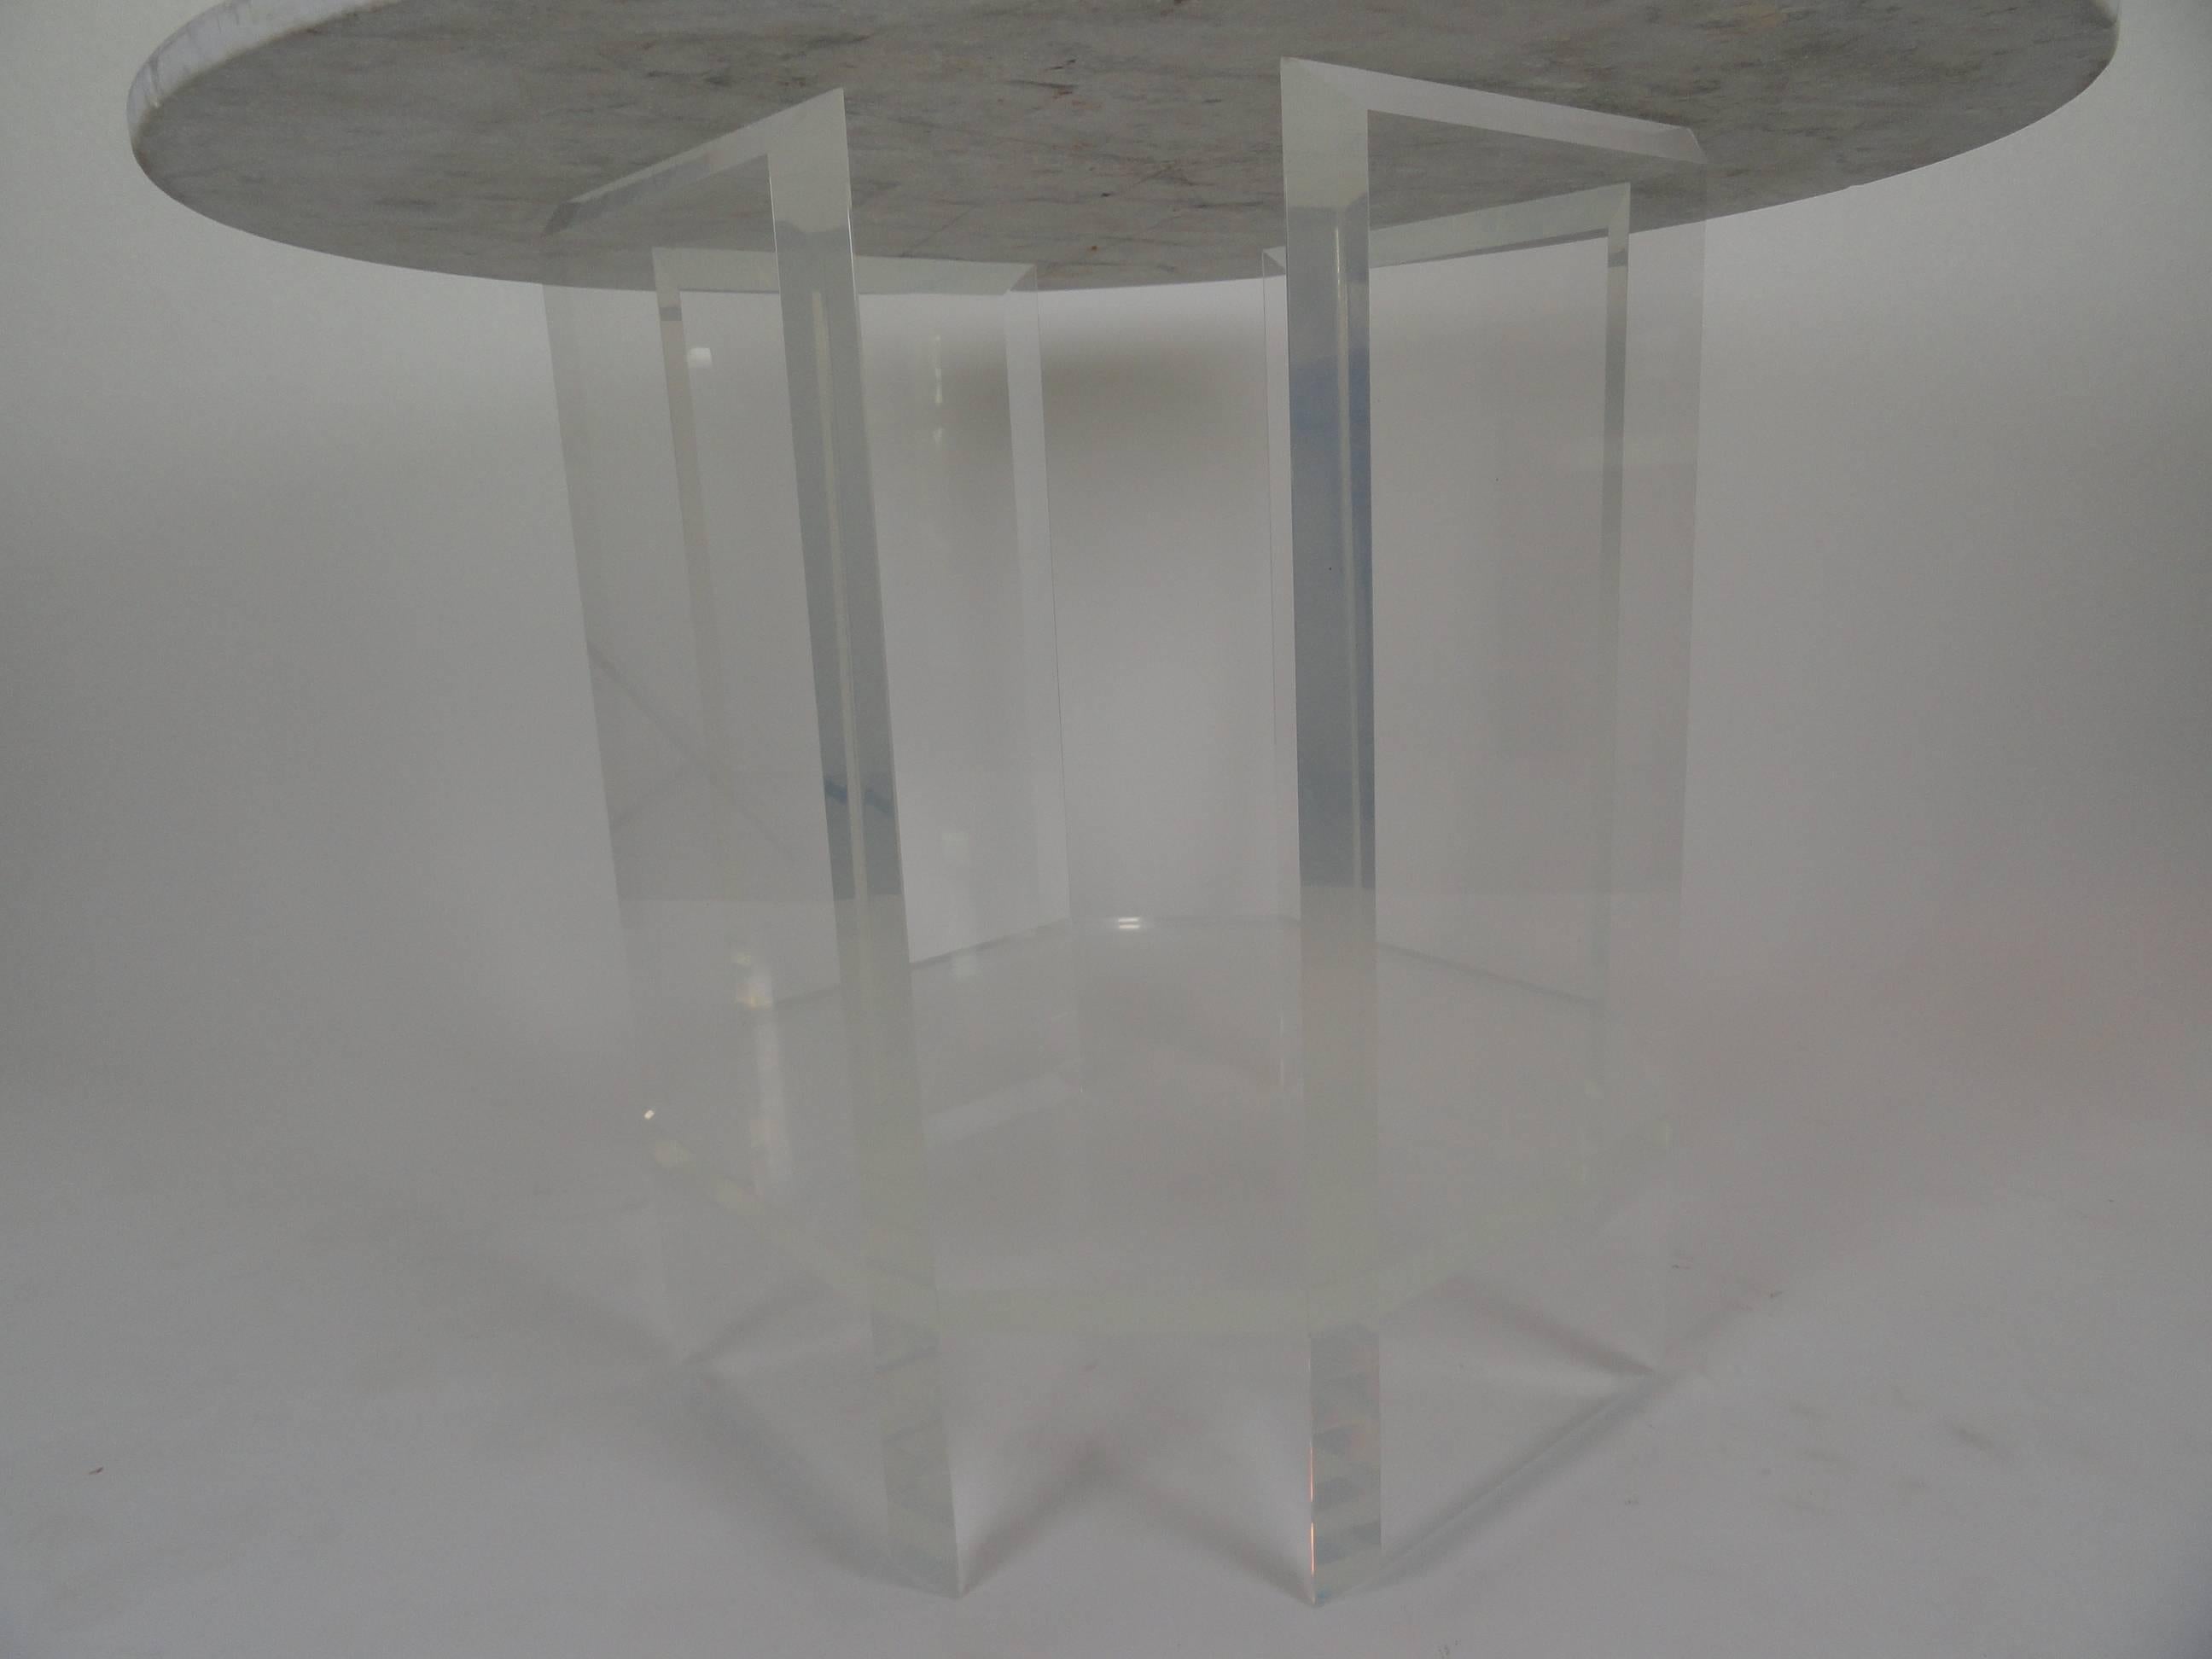 Signed and dated (1979) Jeffrey Bigelow acrylic table base. Base is octagonal with four uprights. Shown with 39.5